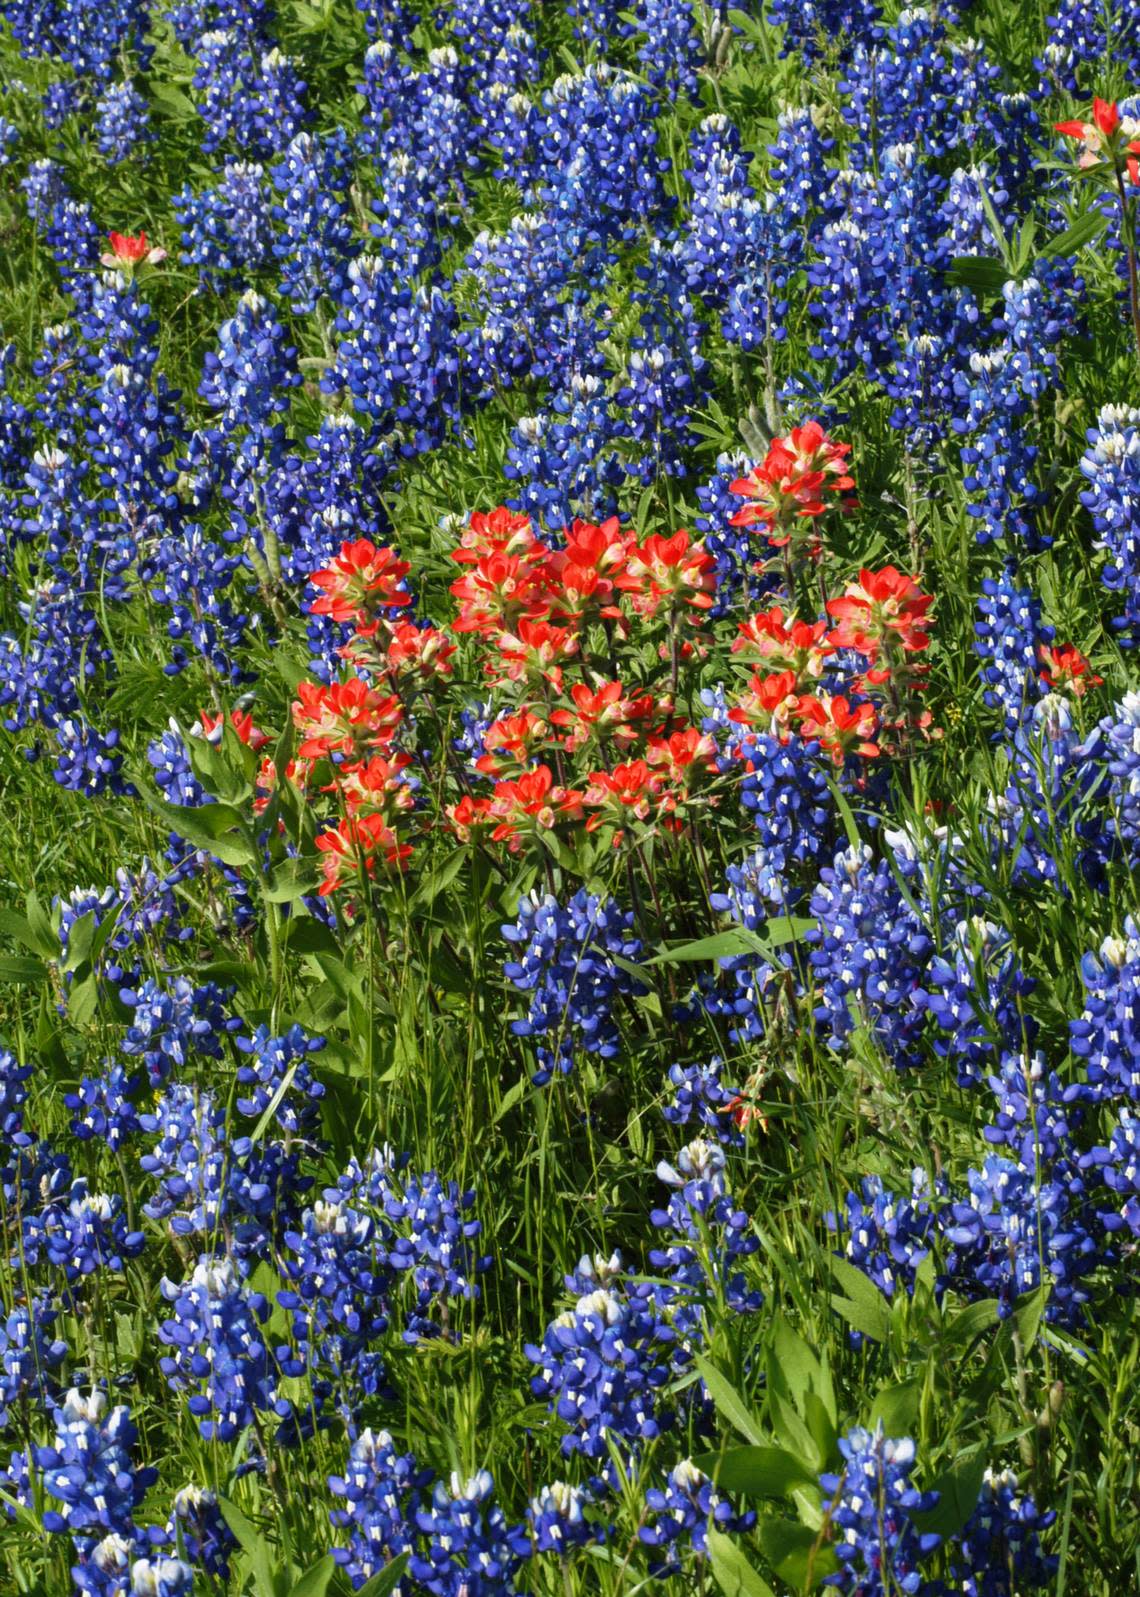 Spring wildflowers such as bluebonnets and others must be planted in early fall, but weather will have to change for them to germinate successfully.